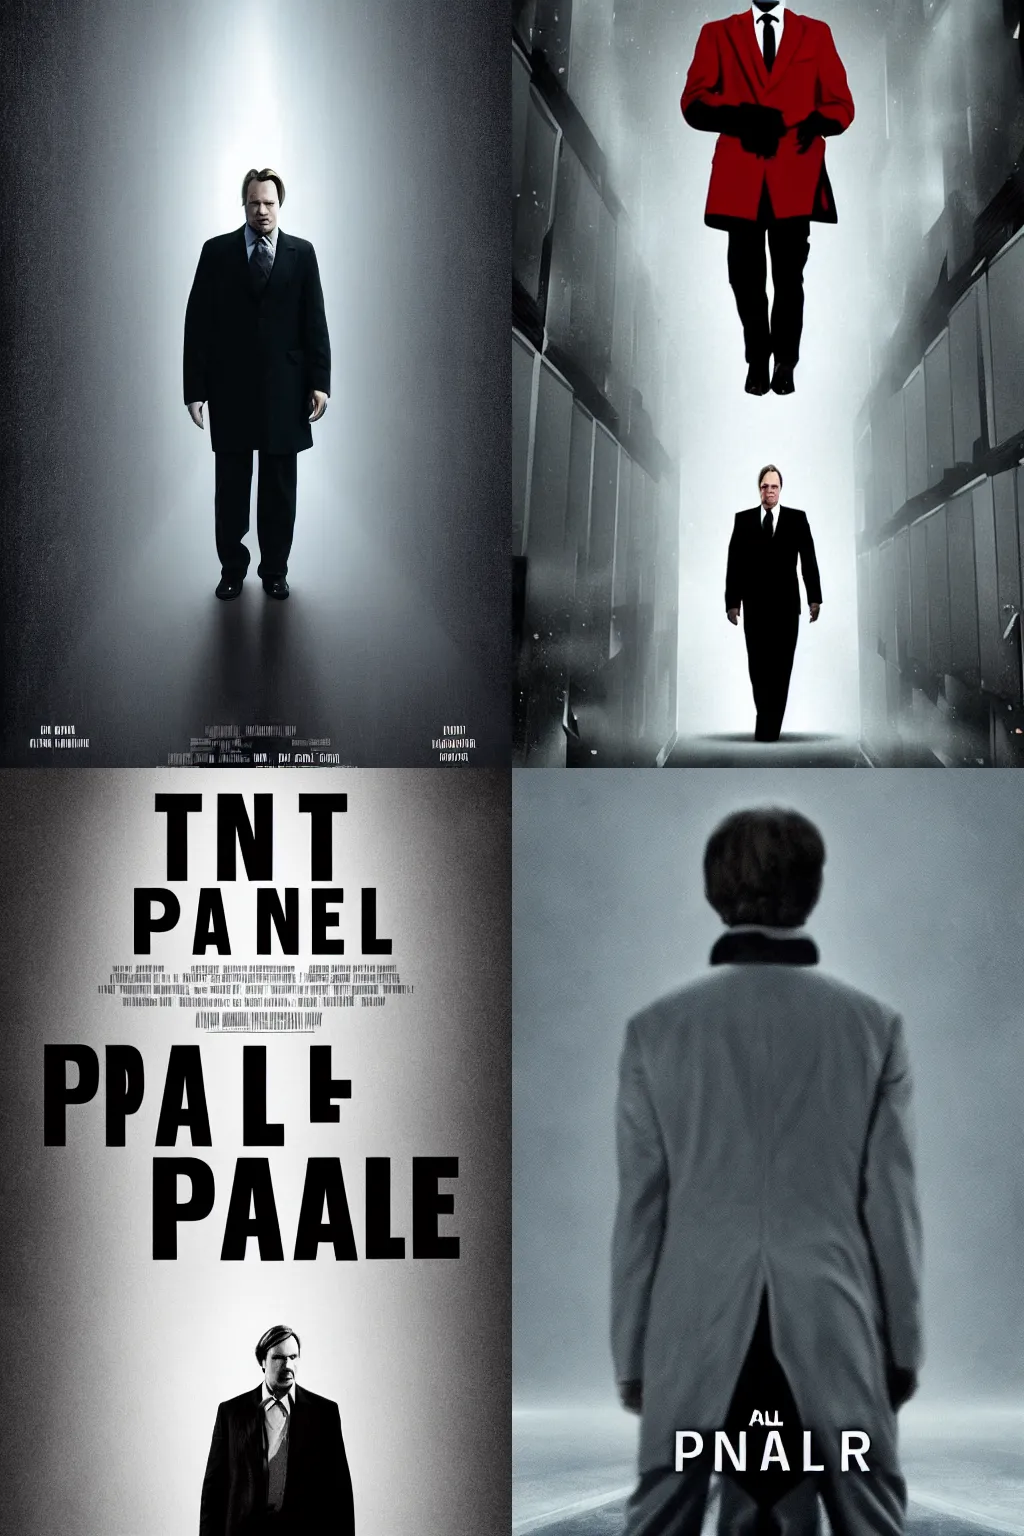 Prompt: movie poster the stanley parable, christopher nolan adaptation, 2 0 2 3